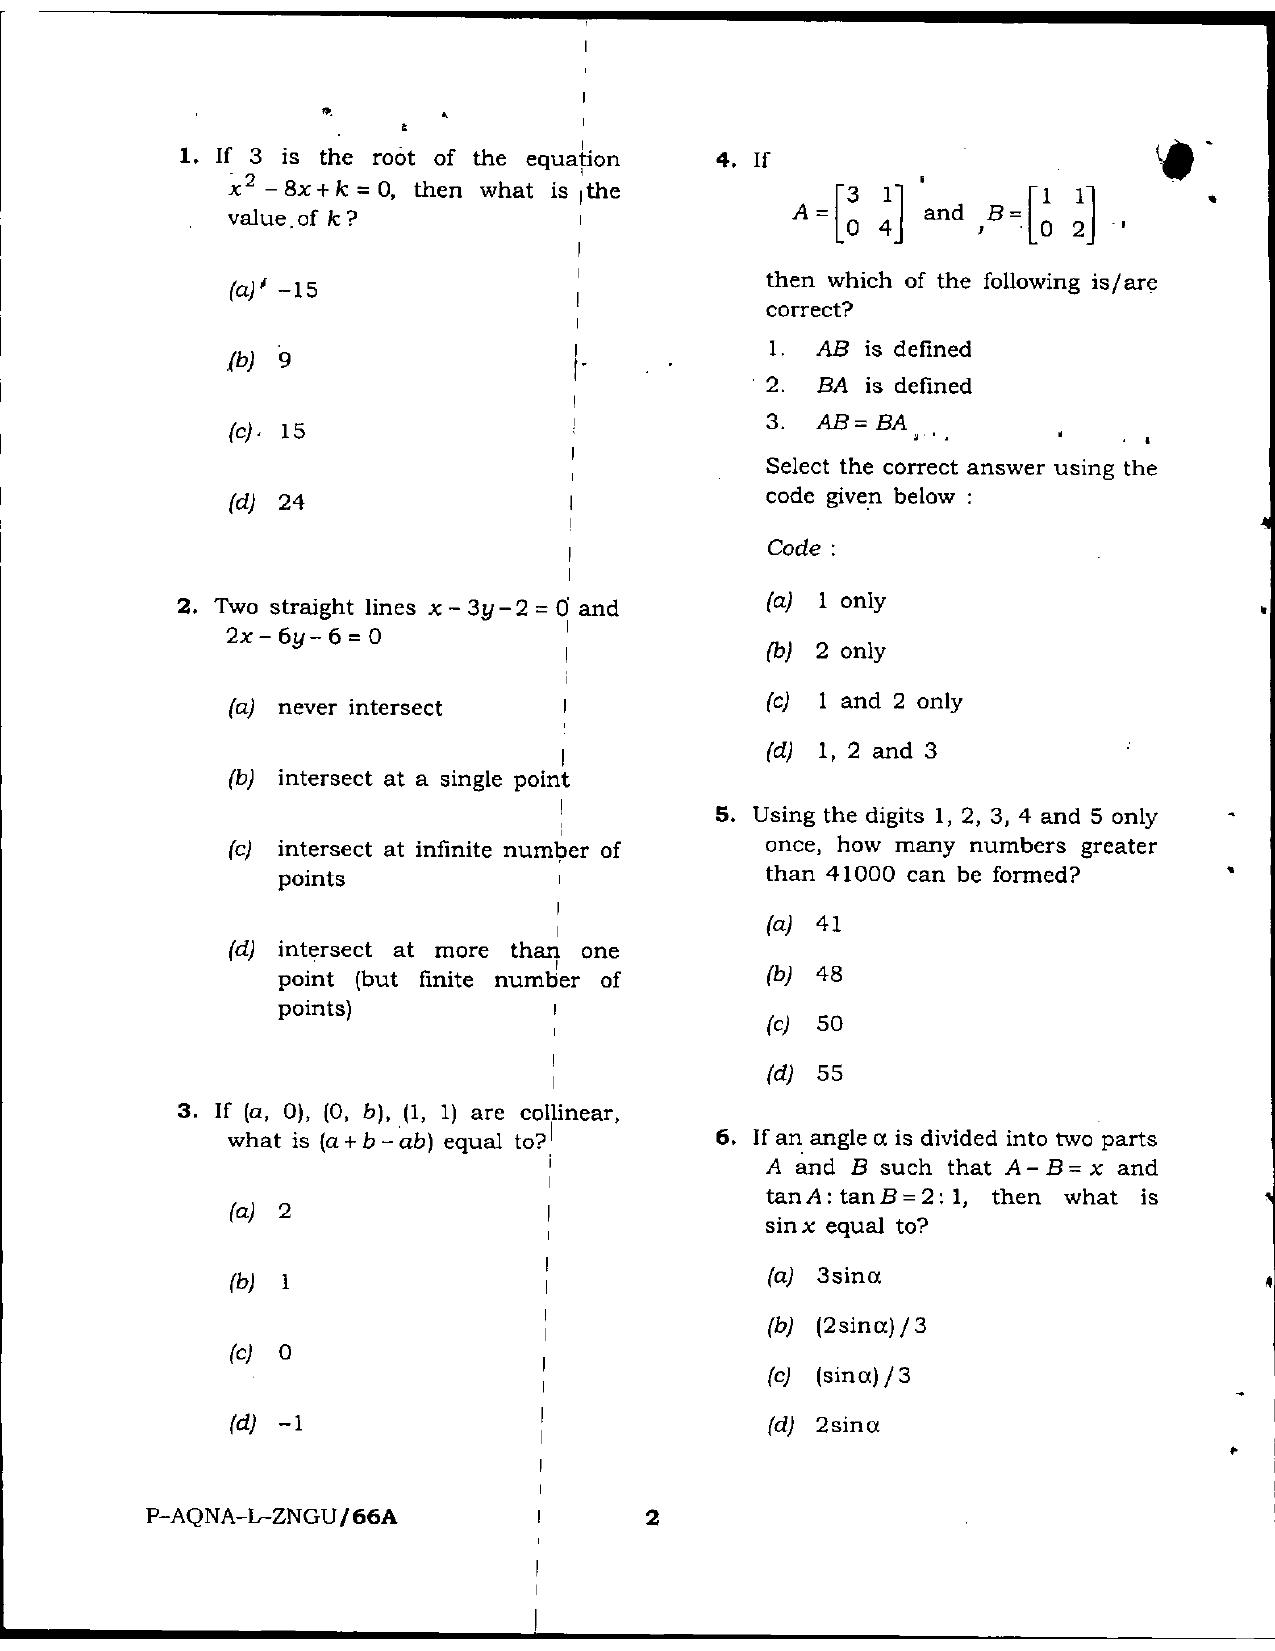 Jammu Kashmir Accounts Assistant Previous Papers for Mathematics - Page 2